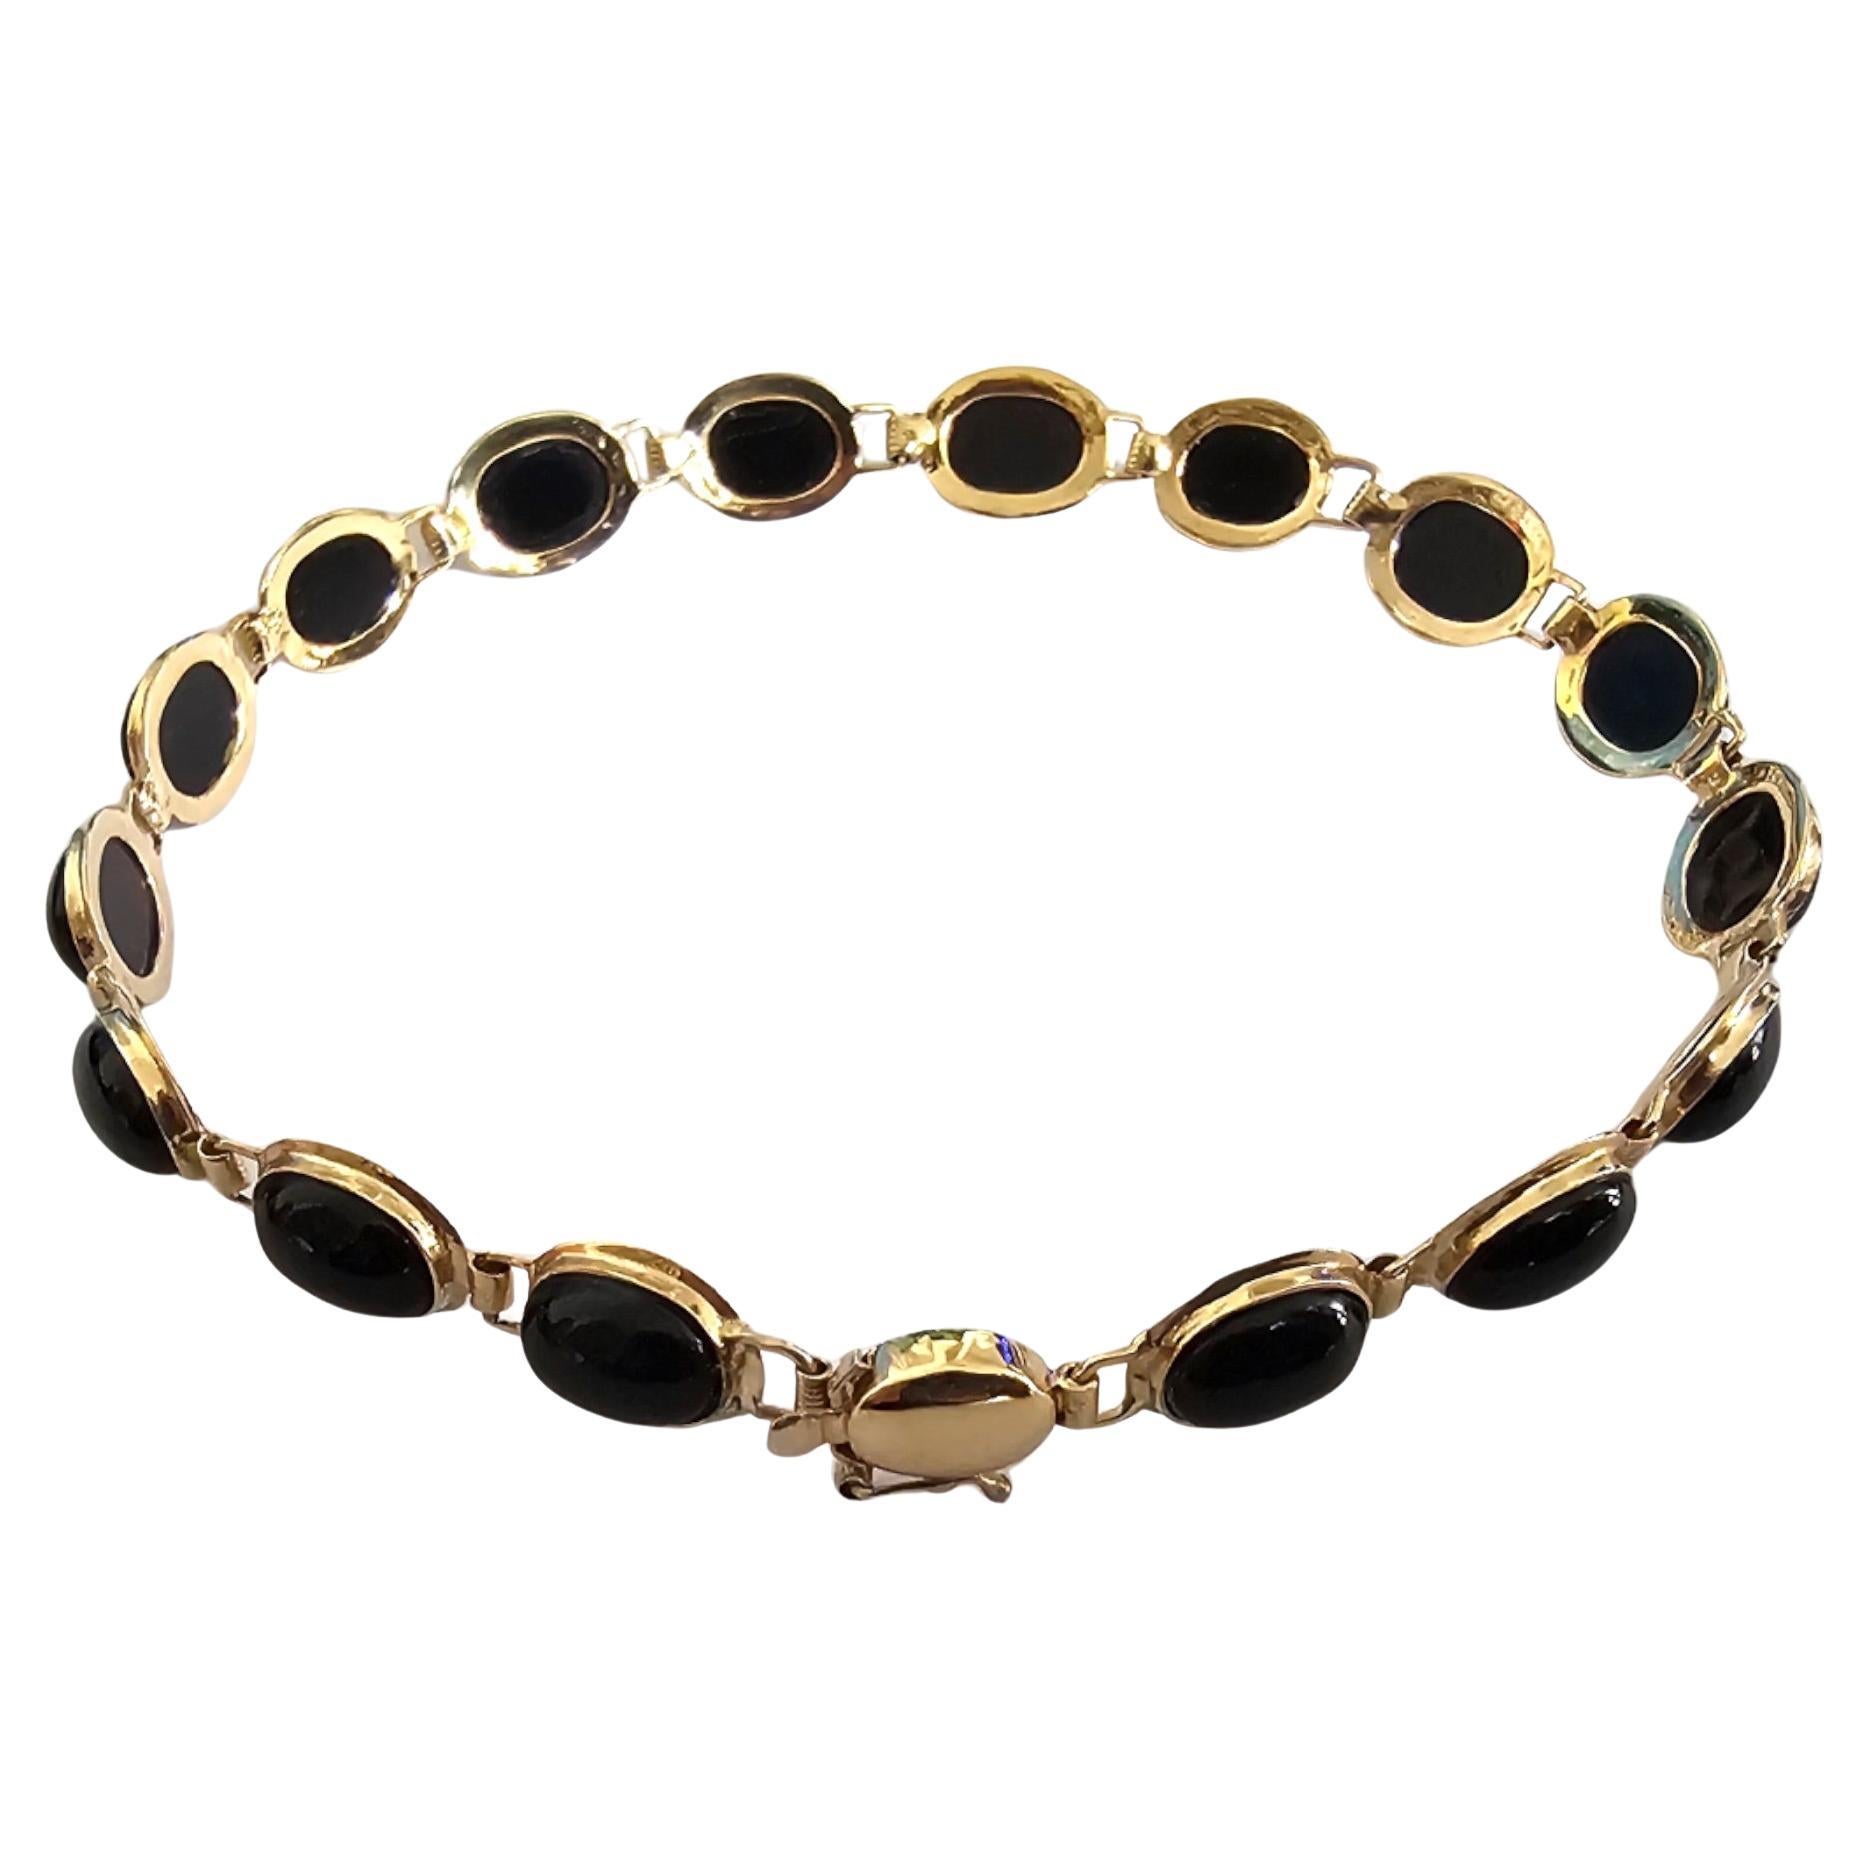 Tibetan Black Onyx Beaded Bracelet (with 14K Solid Yellow Gold) For Sale